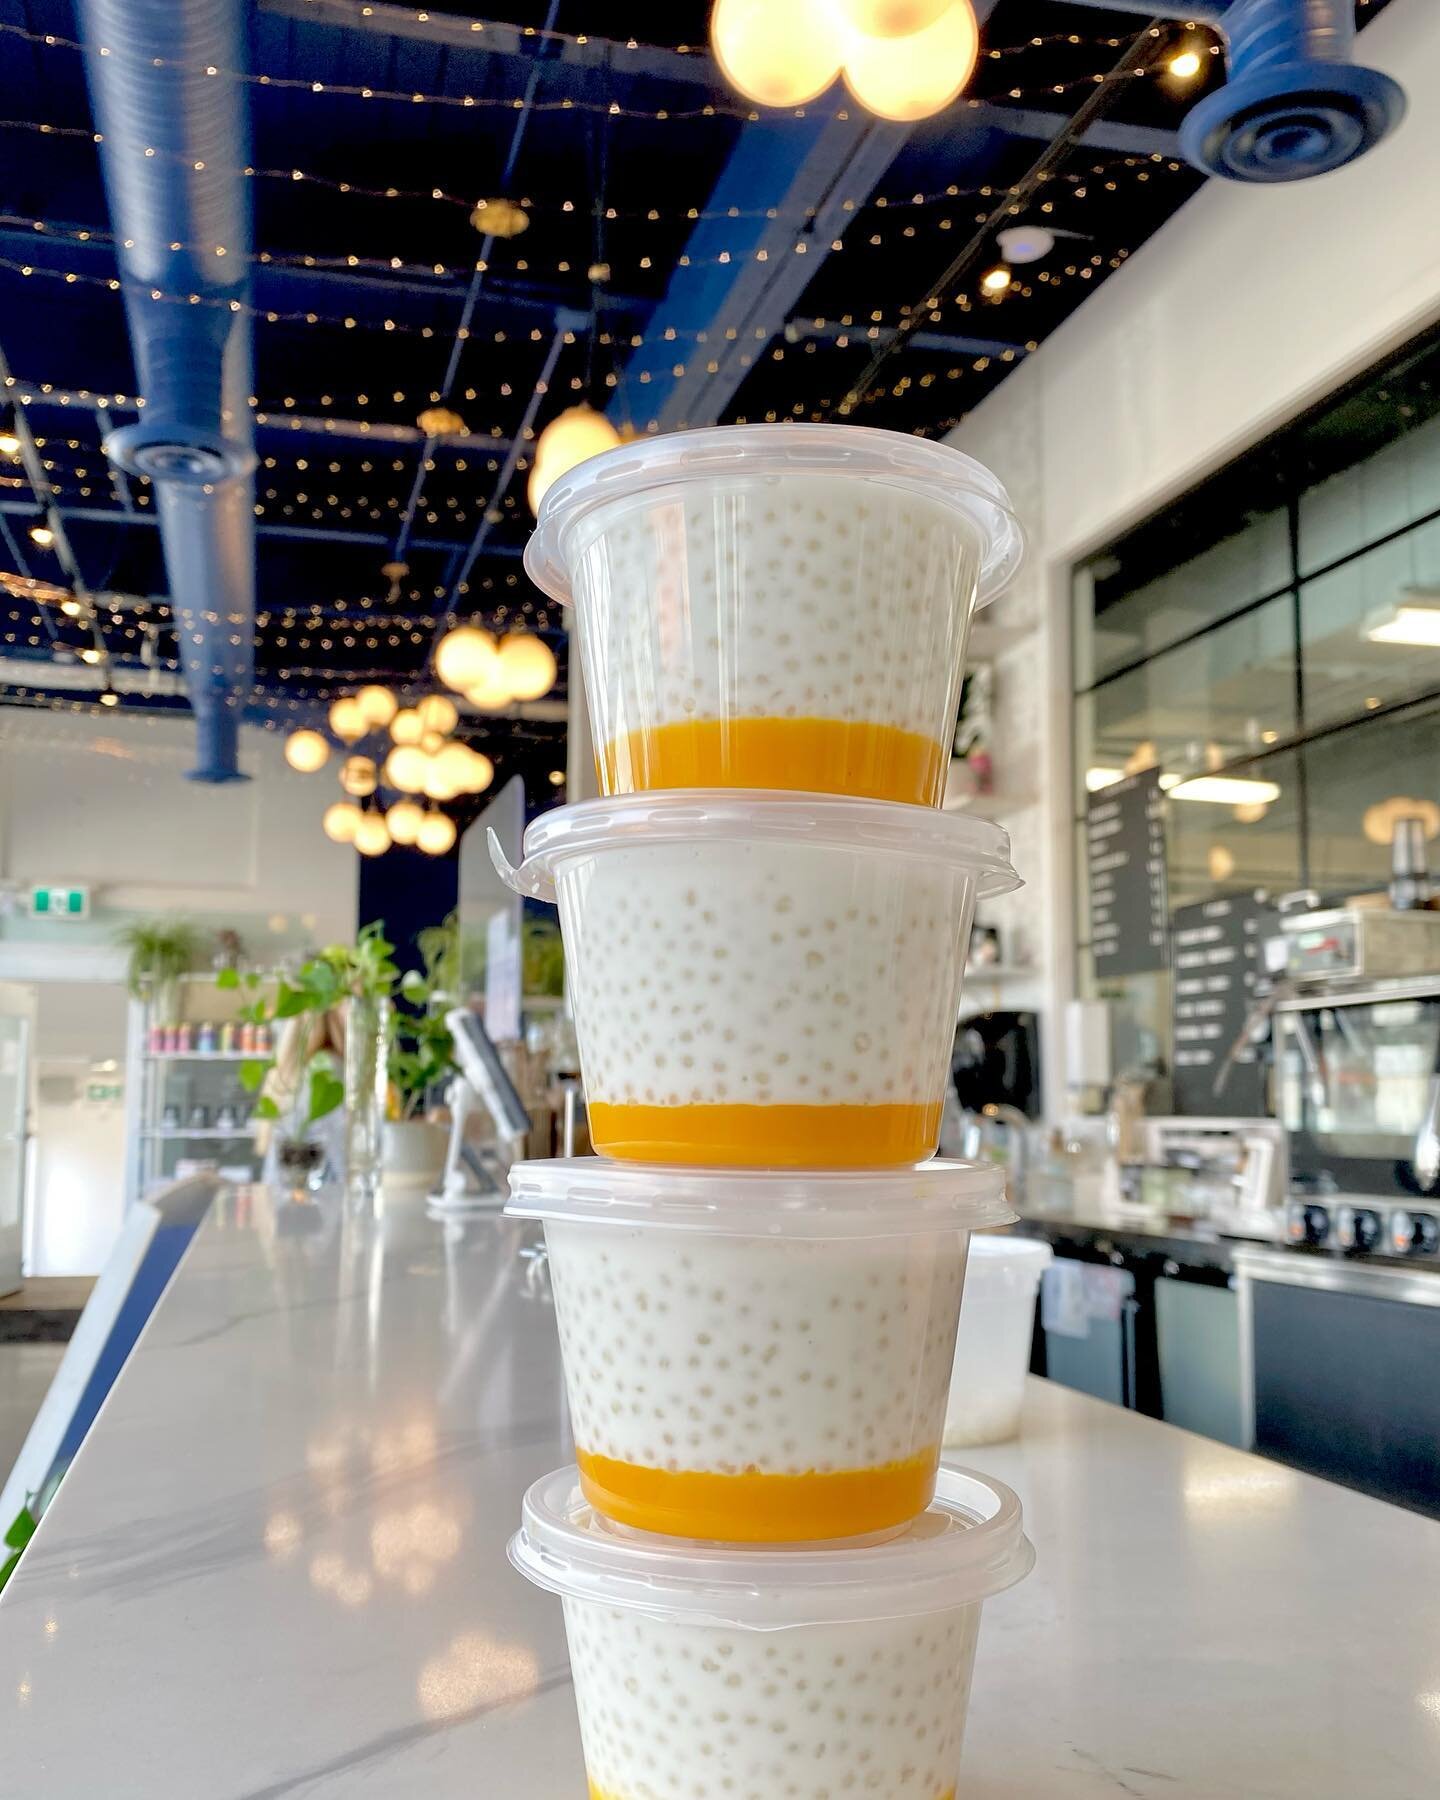 Tapioca tower. 💛

Have you tried our mango tapioca dessert yet? Inspired by our childhood days of eating Vietnamese Ch&egrave; (desserts &amp; puddings), the taste of tapioca dessert is pretty nostalgic to us. PS we sell out of it every week, so if 